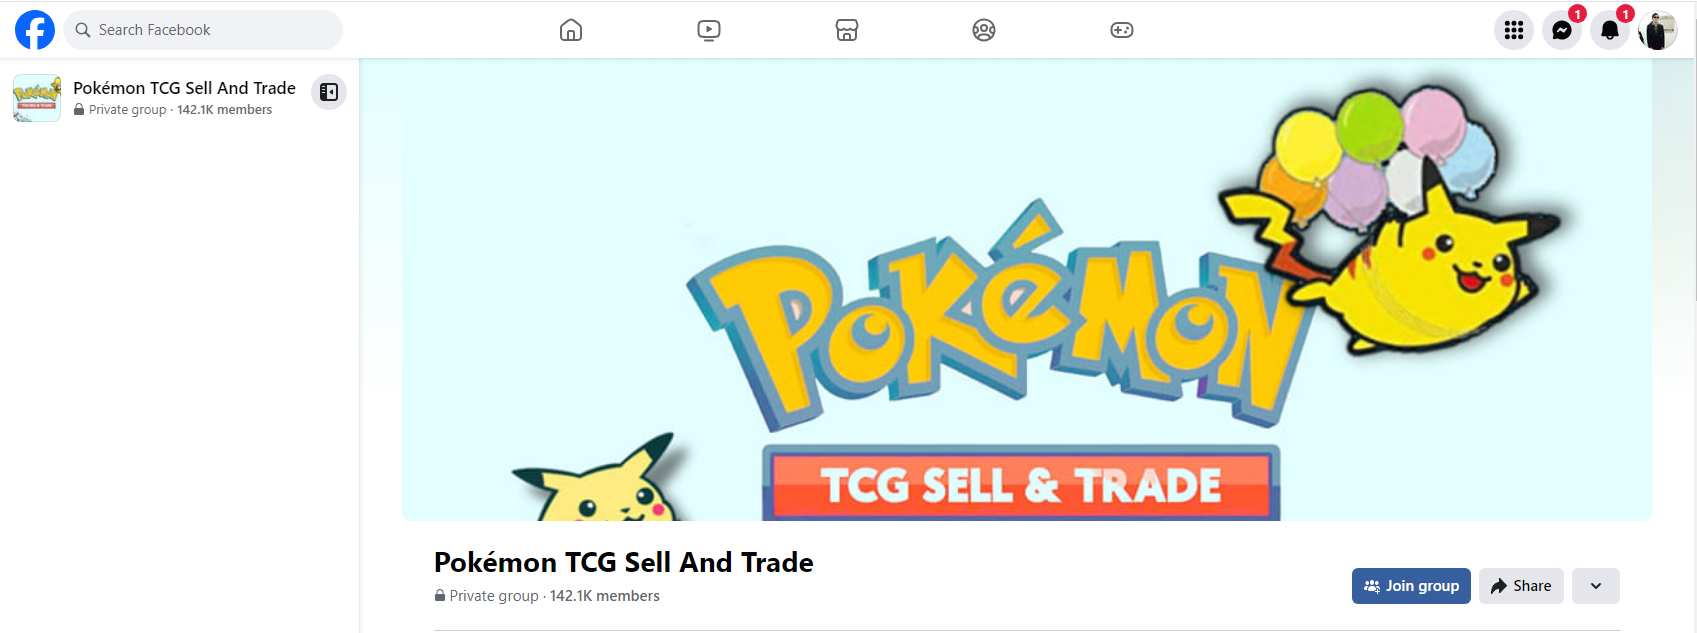 a facebook page for pokemon tcg sell and trade